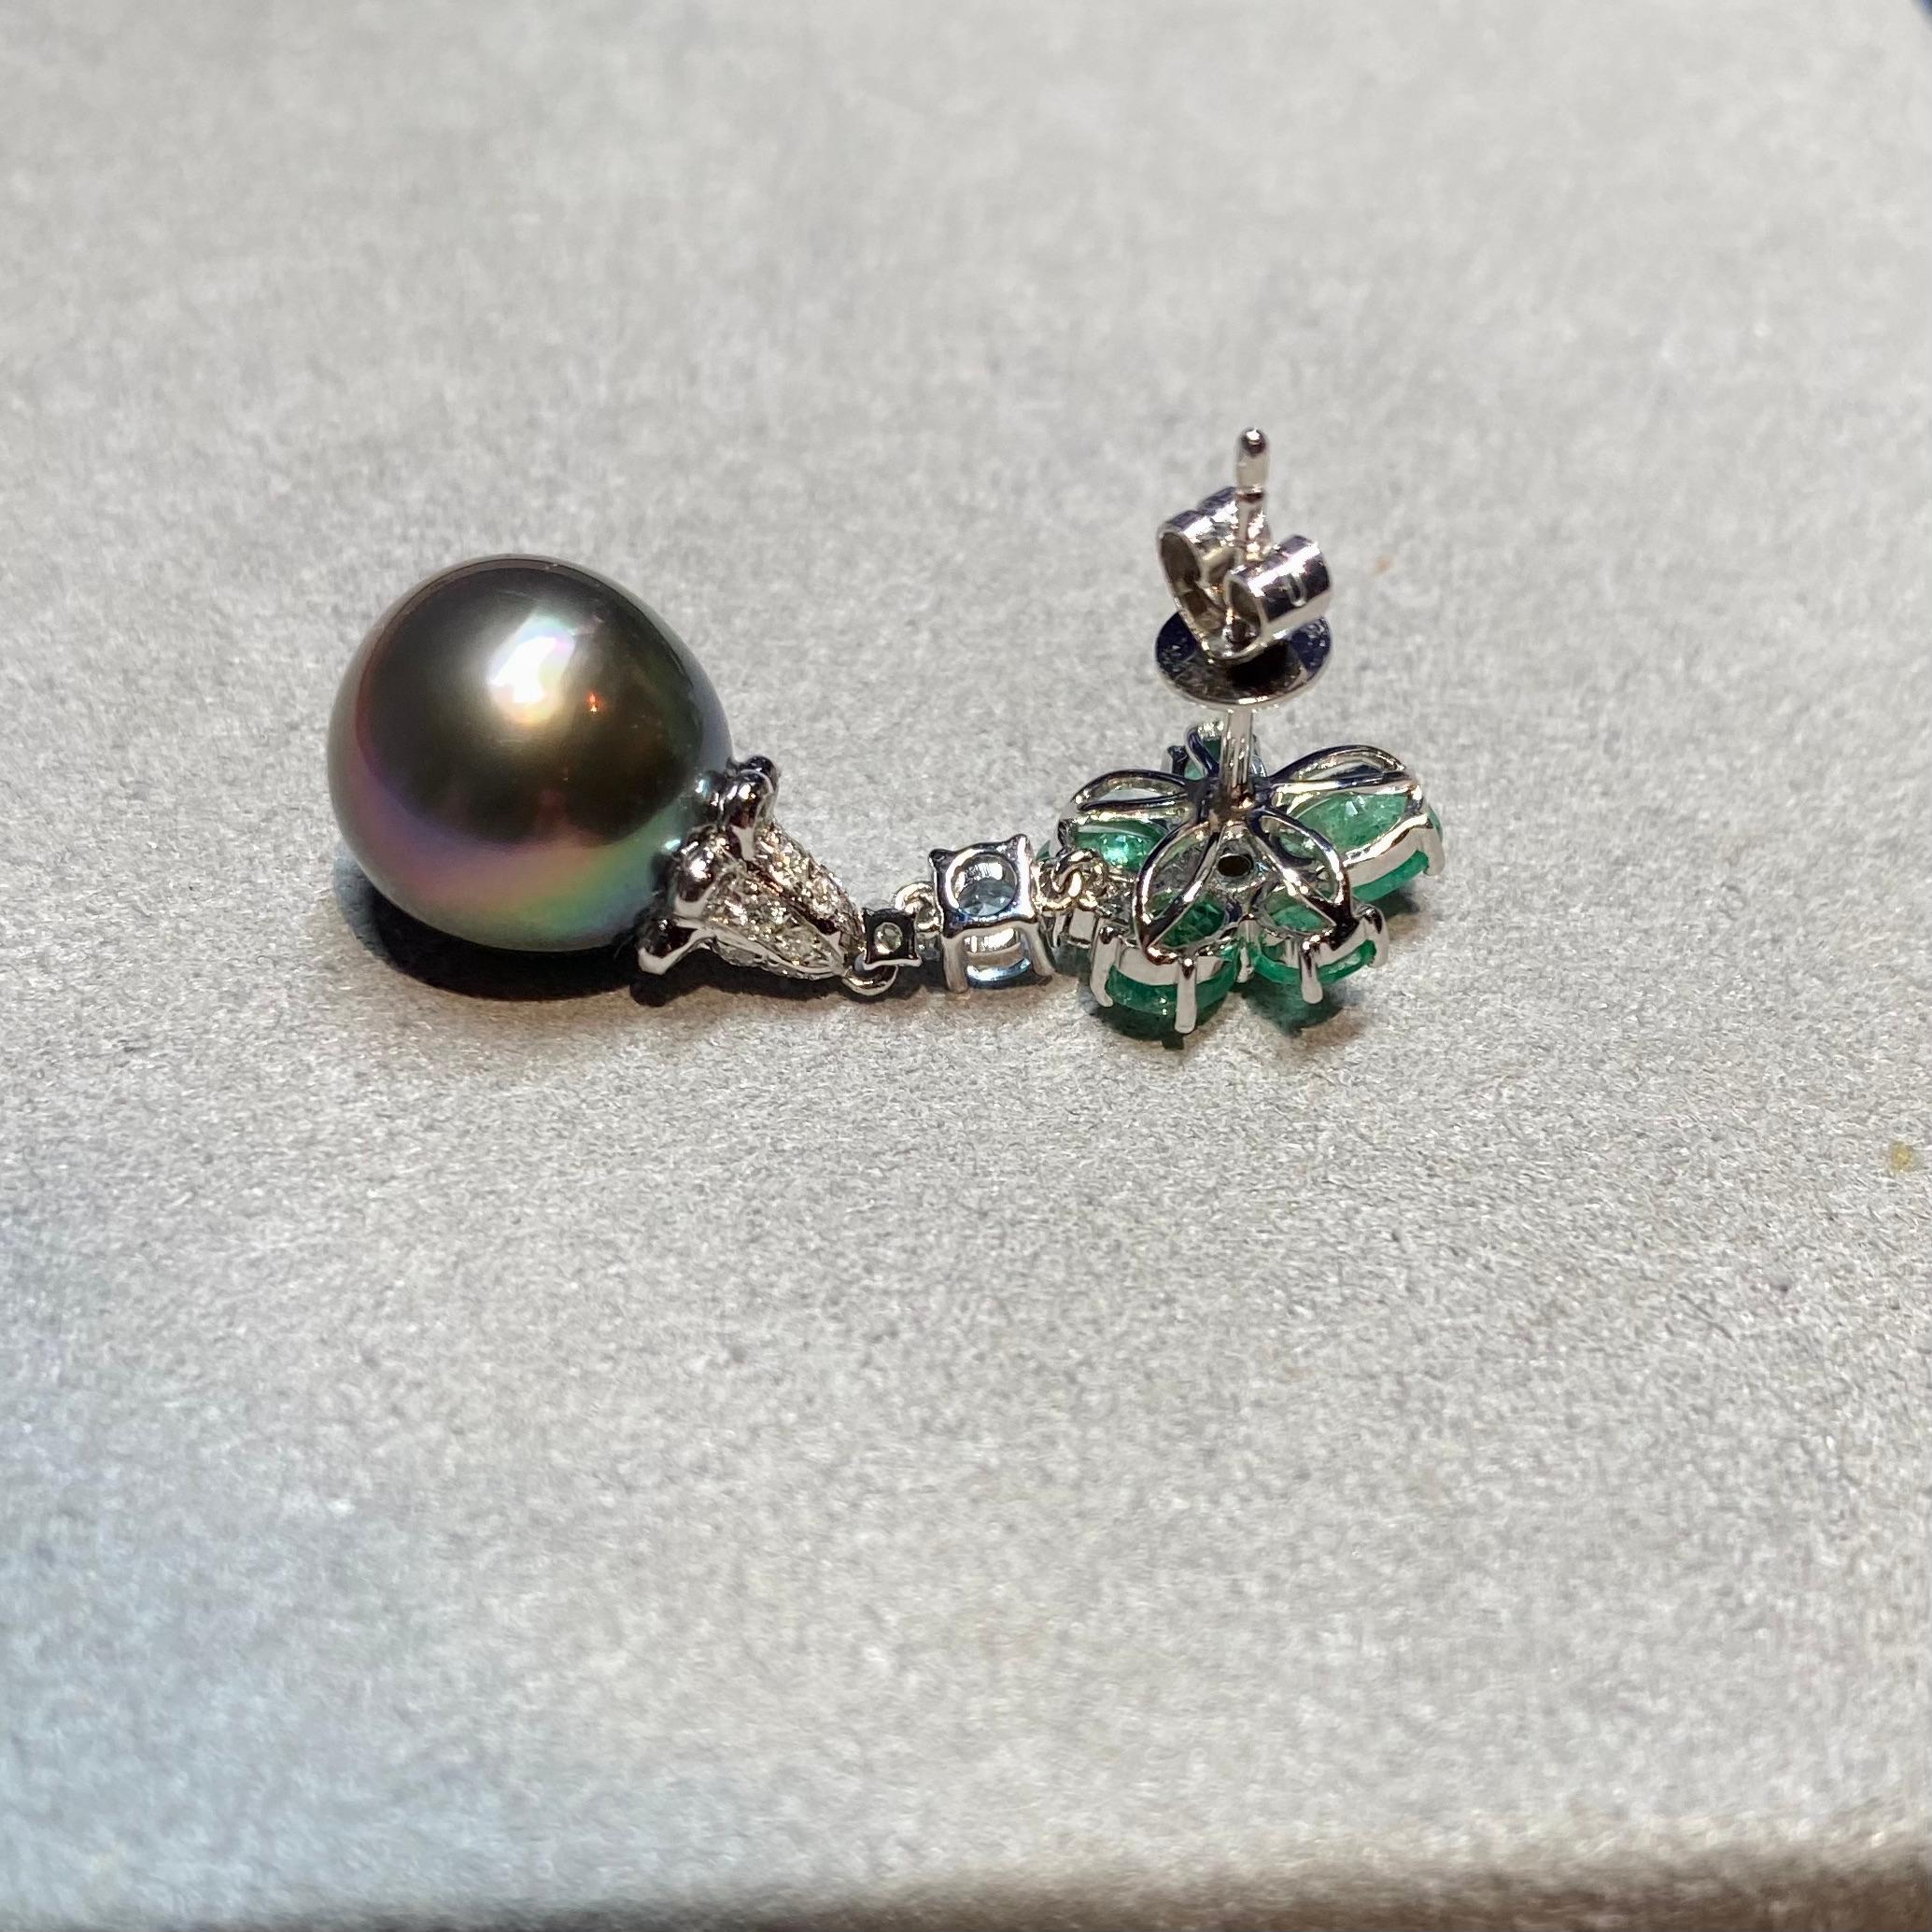 A pair of  Tahitian Pearls, Emerald and Diamond Earring in 18k White Gold
It consists of A pair drop Shape Tahitian Pearl with Good Lustre and very little Spotted Surface 
The Colour of the Pearls are Peacock Black with Pink and Green Overtone
The